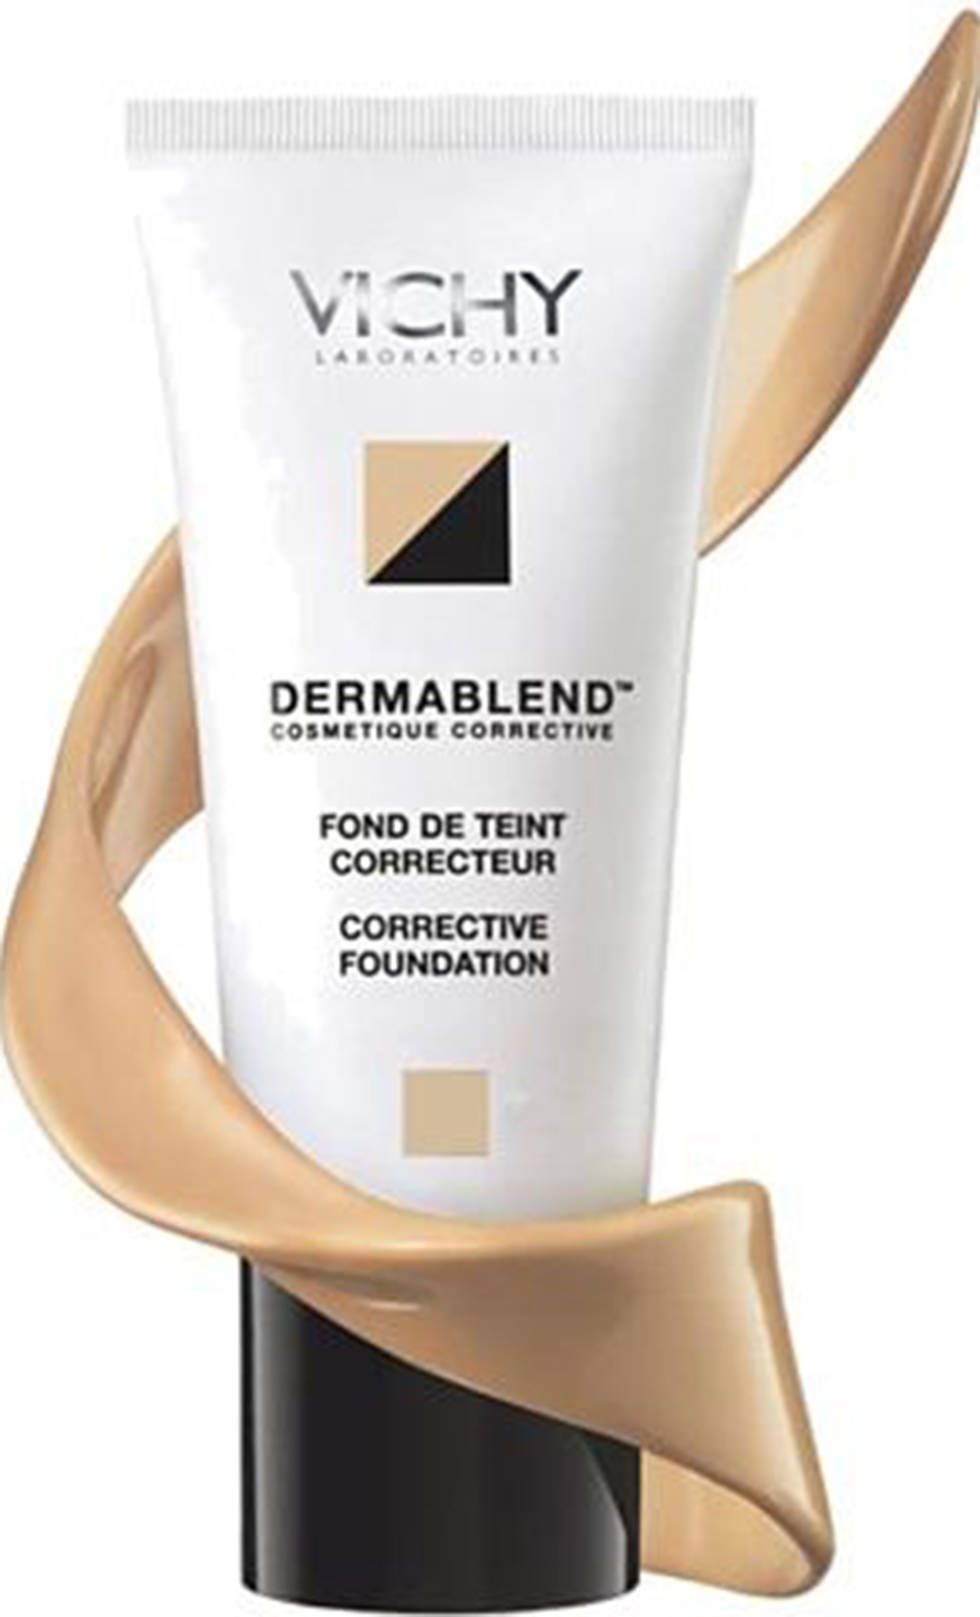 Vichy Dermablend Fluid Corrective Foundation 16hr review - best new foundations tried and tested - Cosmopolitan.co.uk